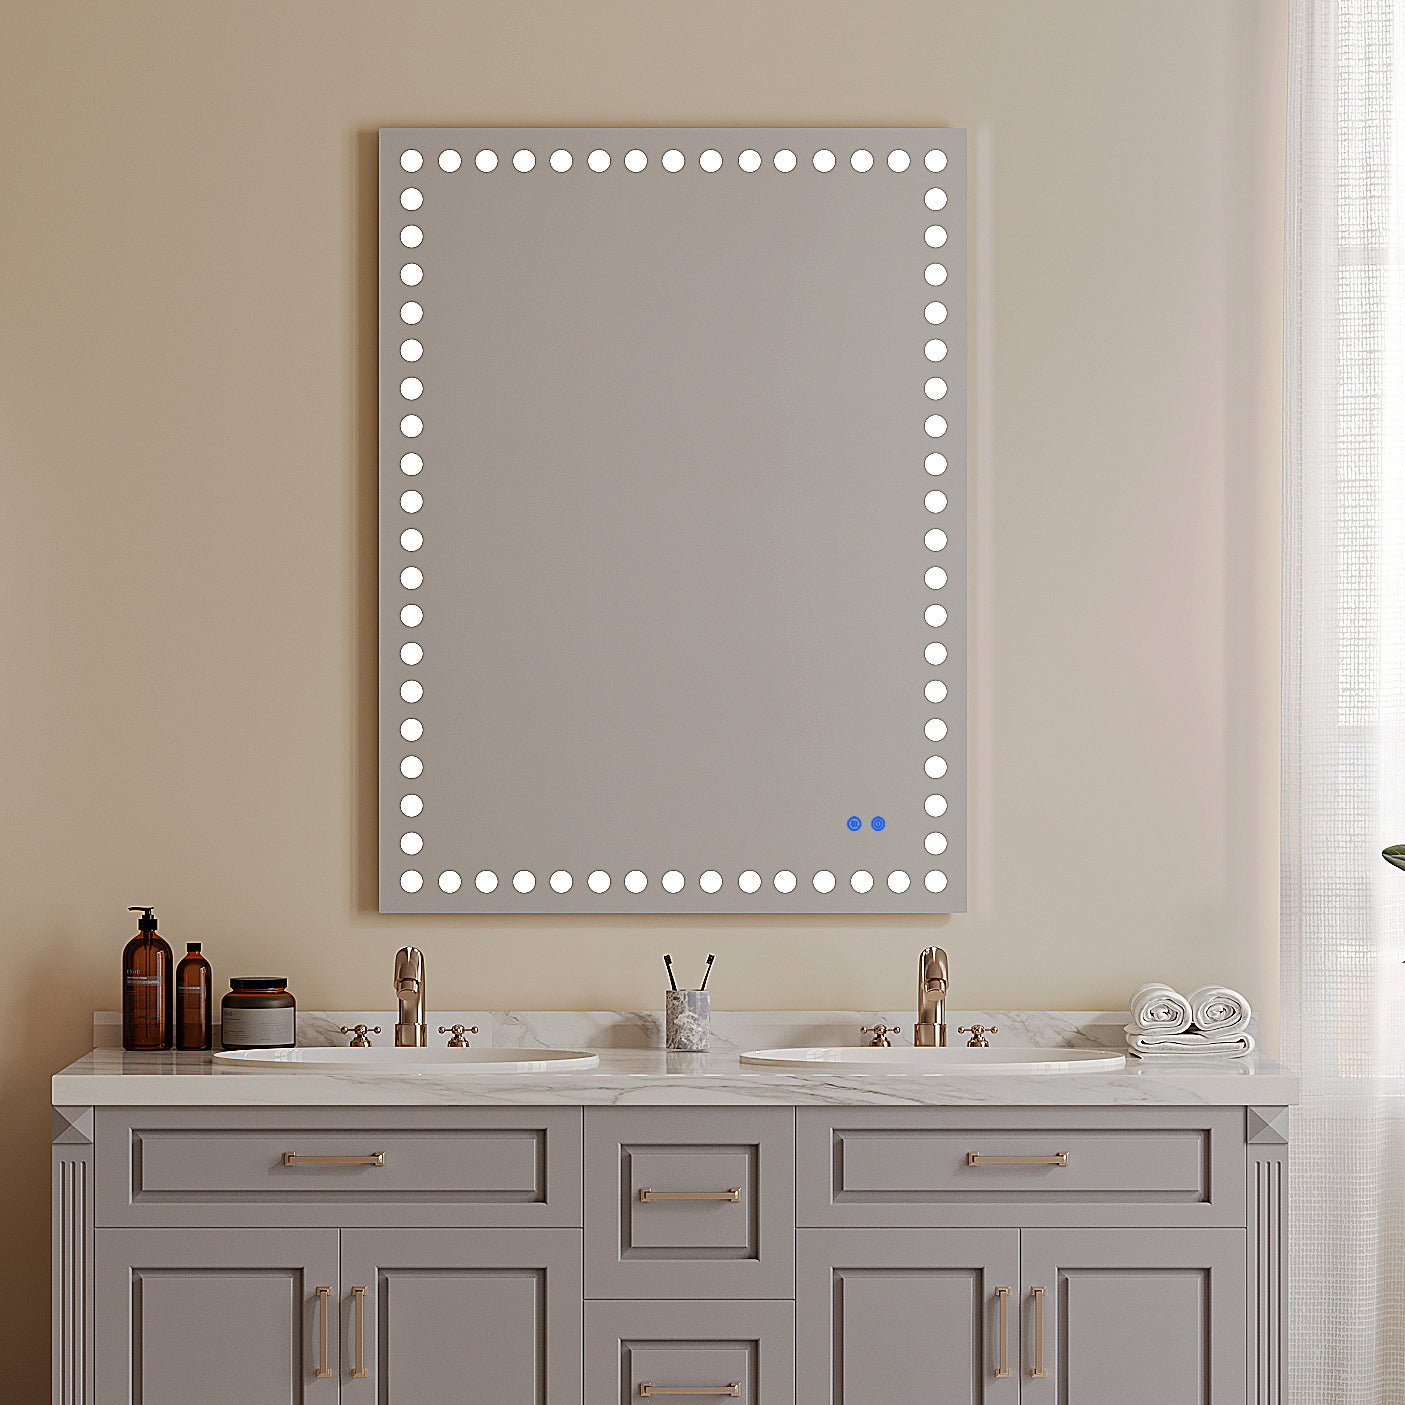 48"X36" Rectangle LED Bathroom Vanity Mirror with Touch Sensor Dimmer, Anti-Fog Memory